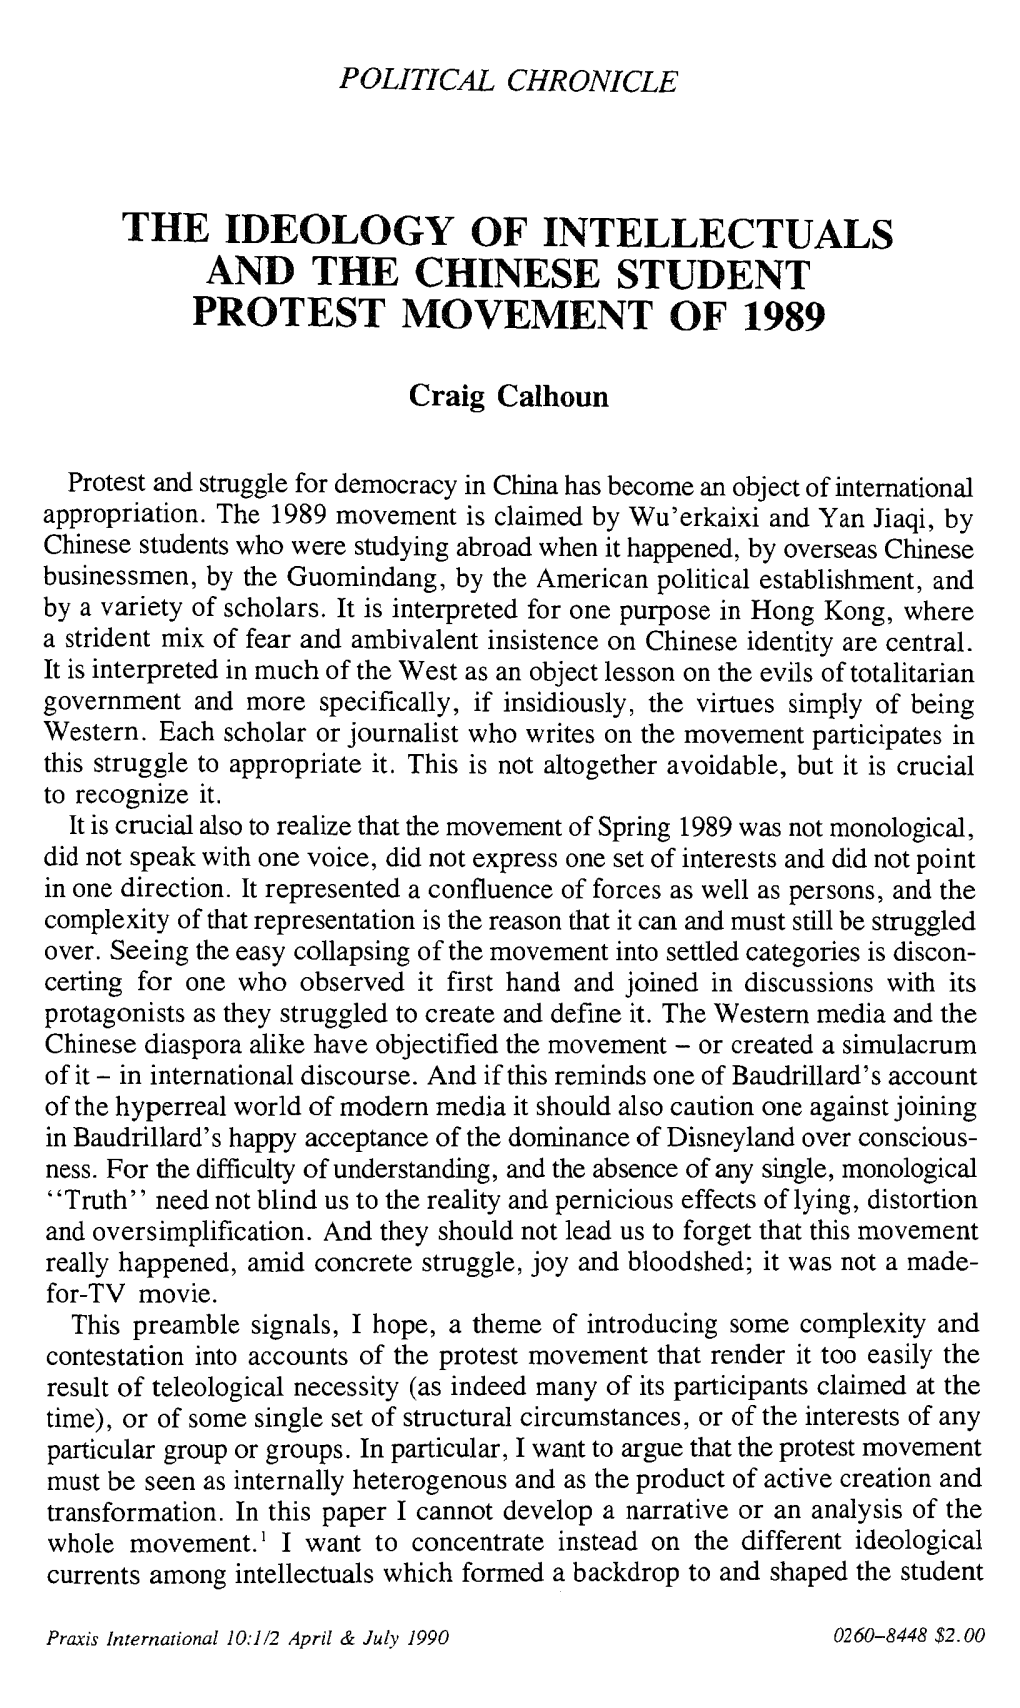 The Ideology of Intellectuals and the Chinese Student